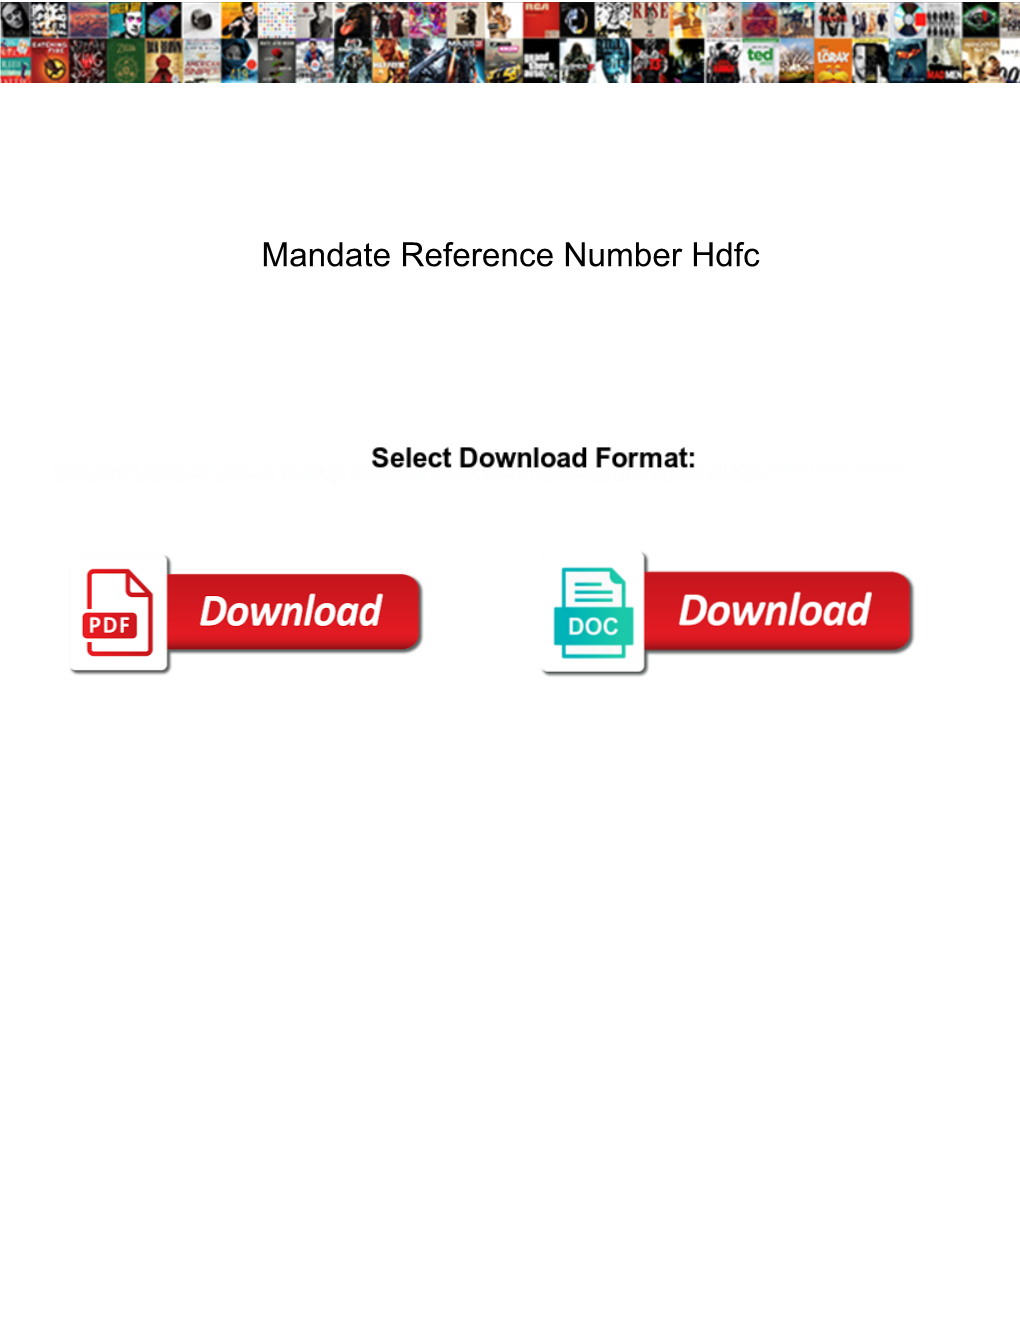 Mandate Reference Number Hdfc